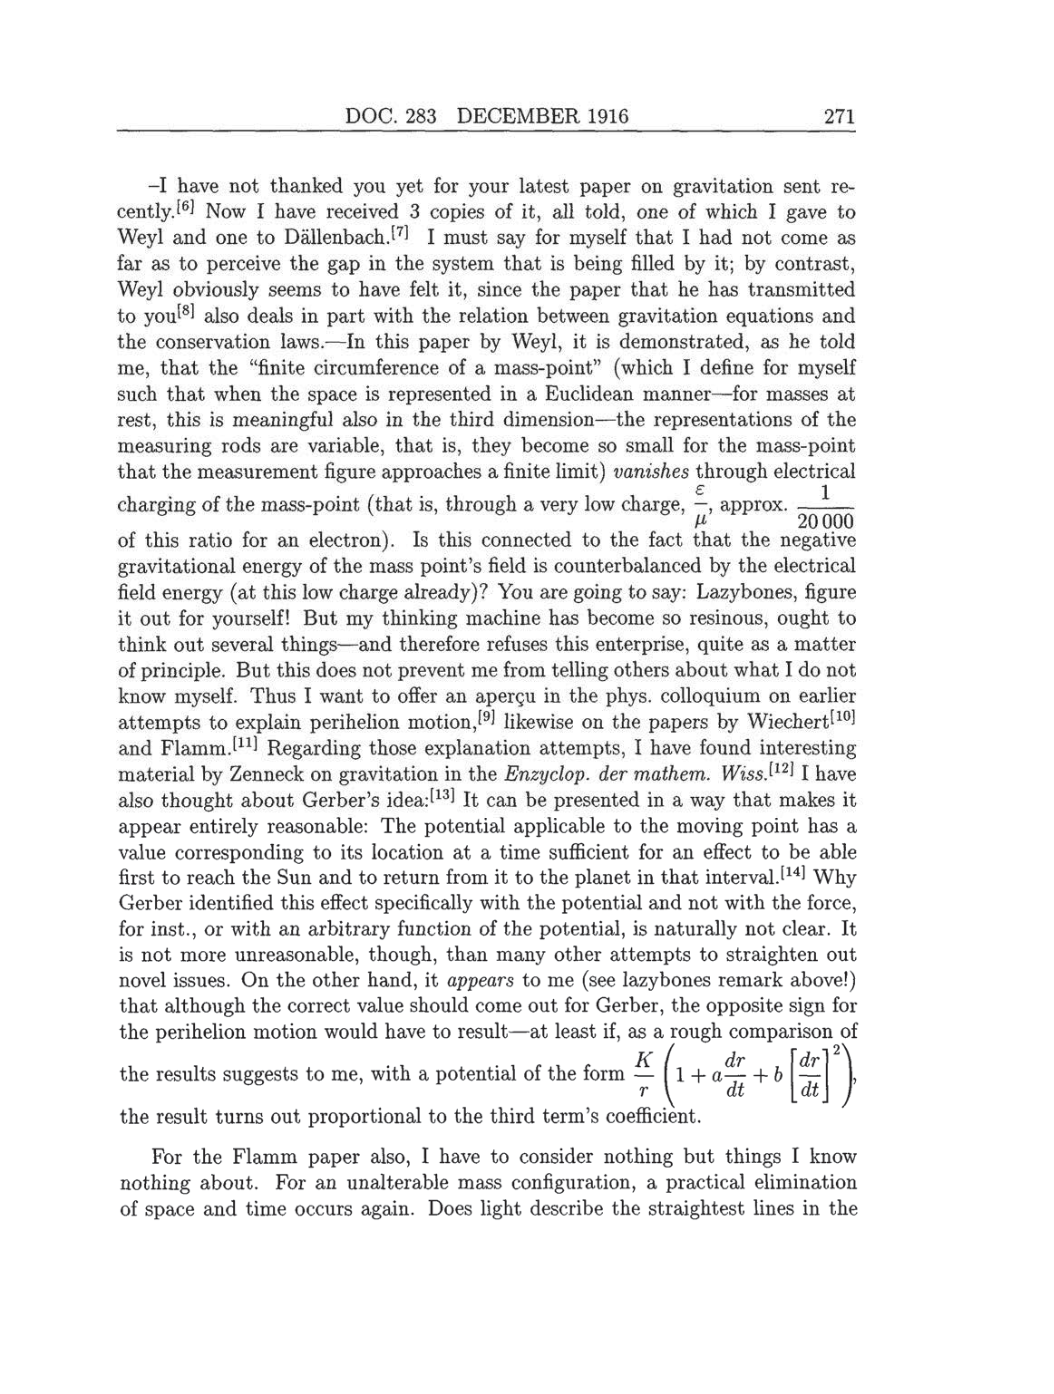 Volume 8: The Berlin Years: Correspondence, 1914-1918 (English translation supplement) page 271